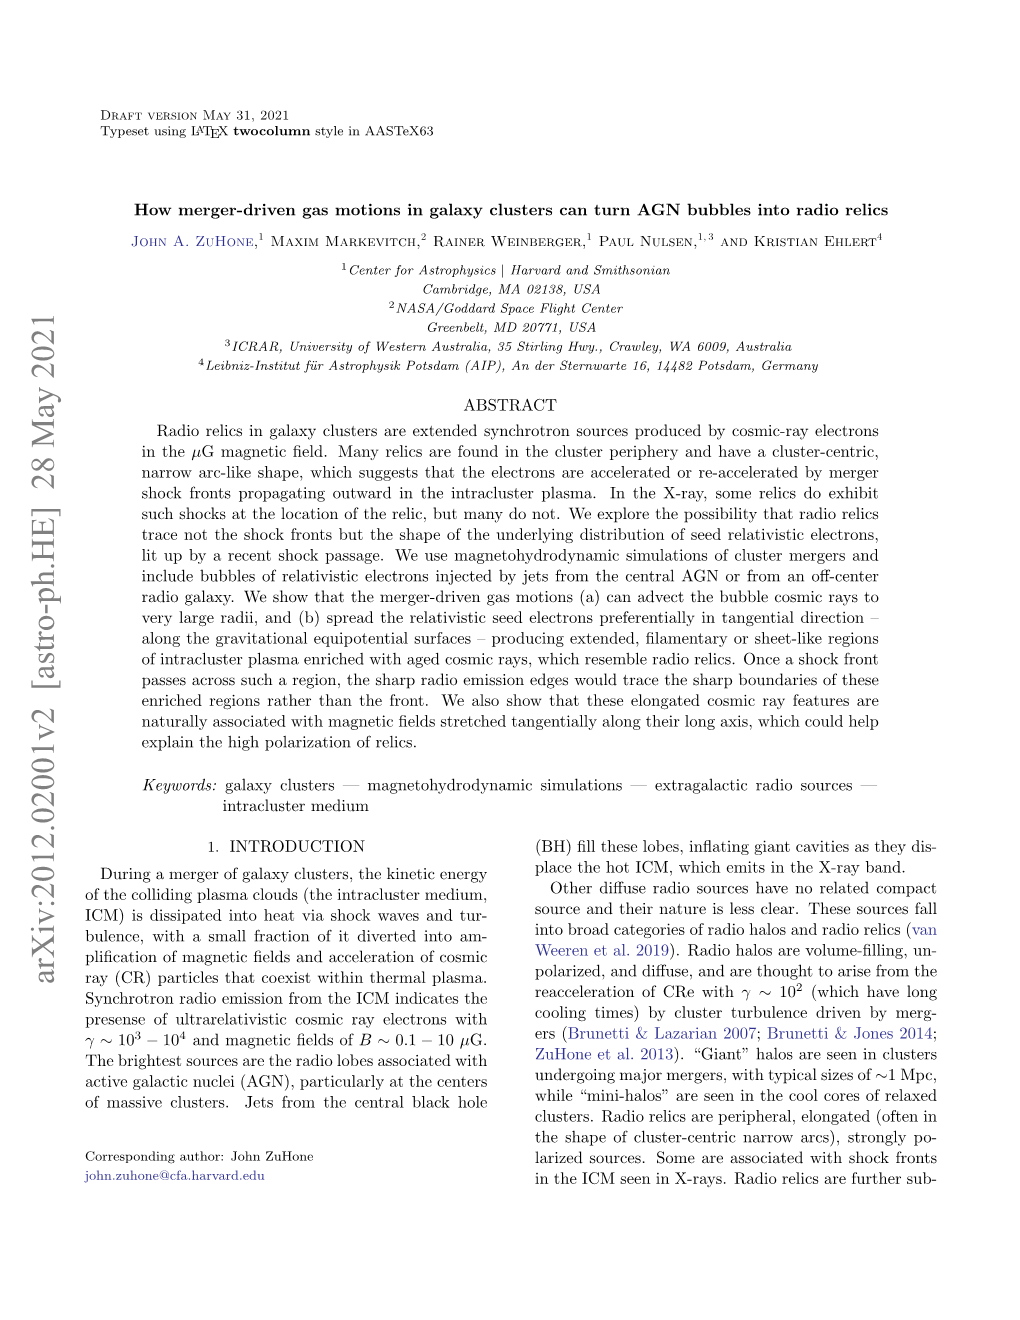 Arxiv:2012.02001V2 [Astro-Ph.HE] 28 May 2021 Ray (CR) Particles That Coexist Within Thermal Plasma